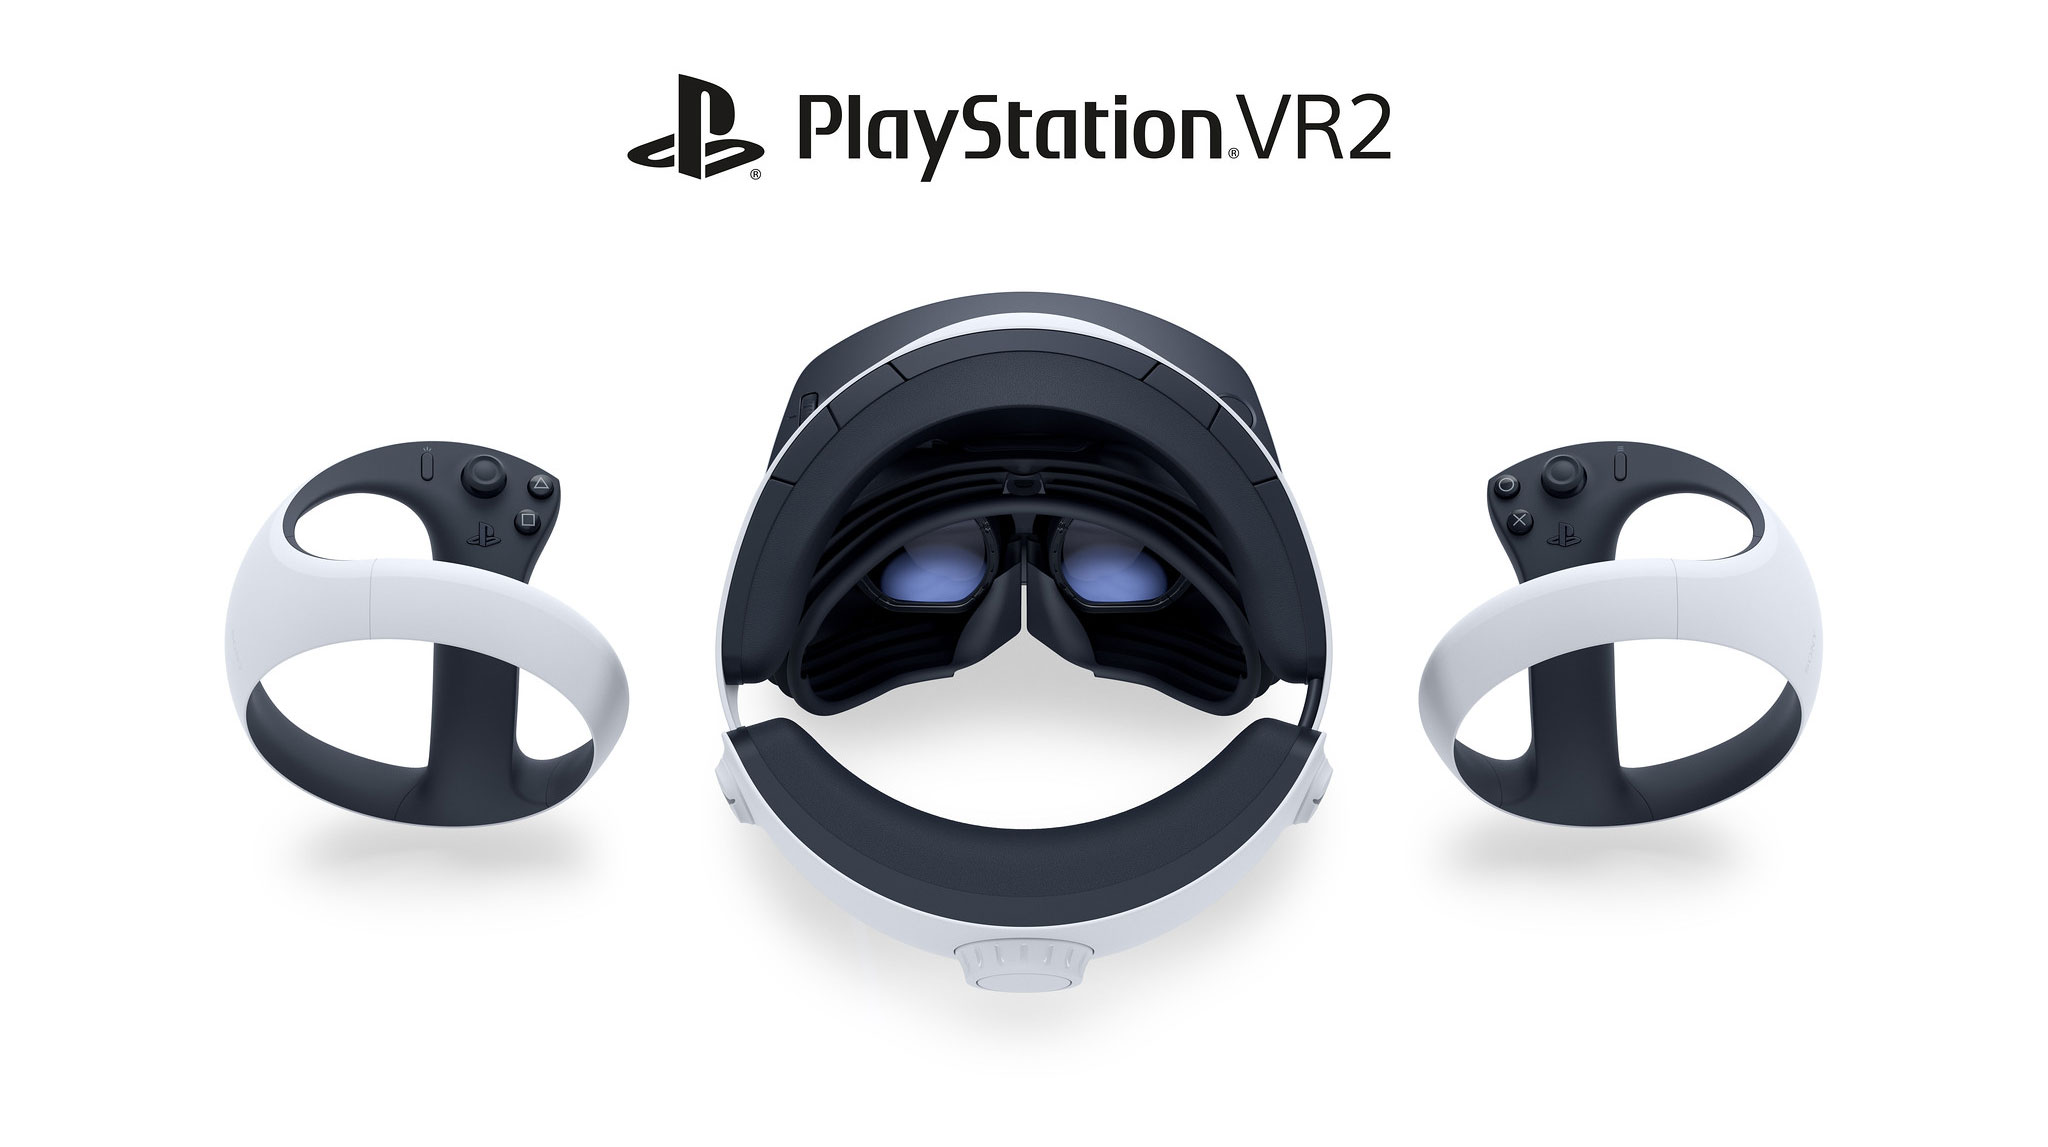 Sony’s PSVR 2 will support over 20 major titles upon release